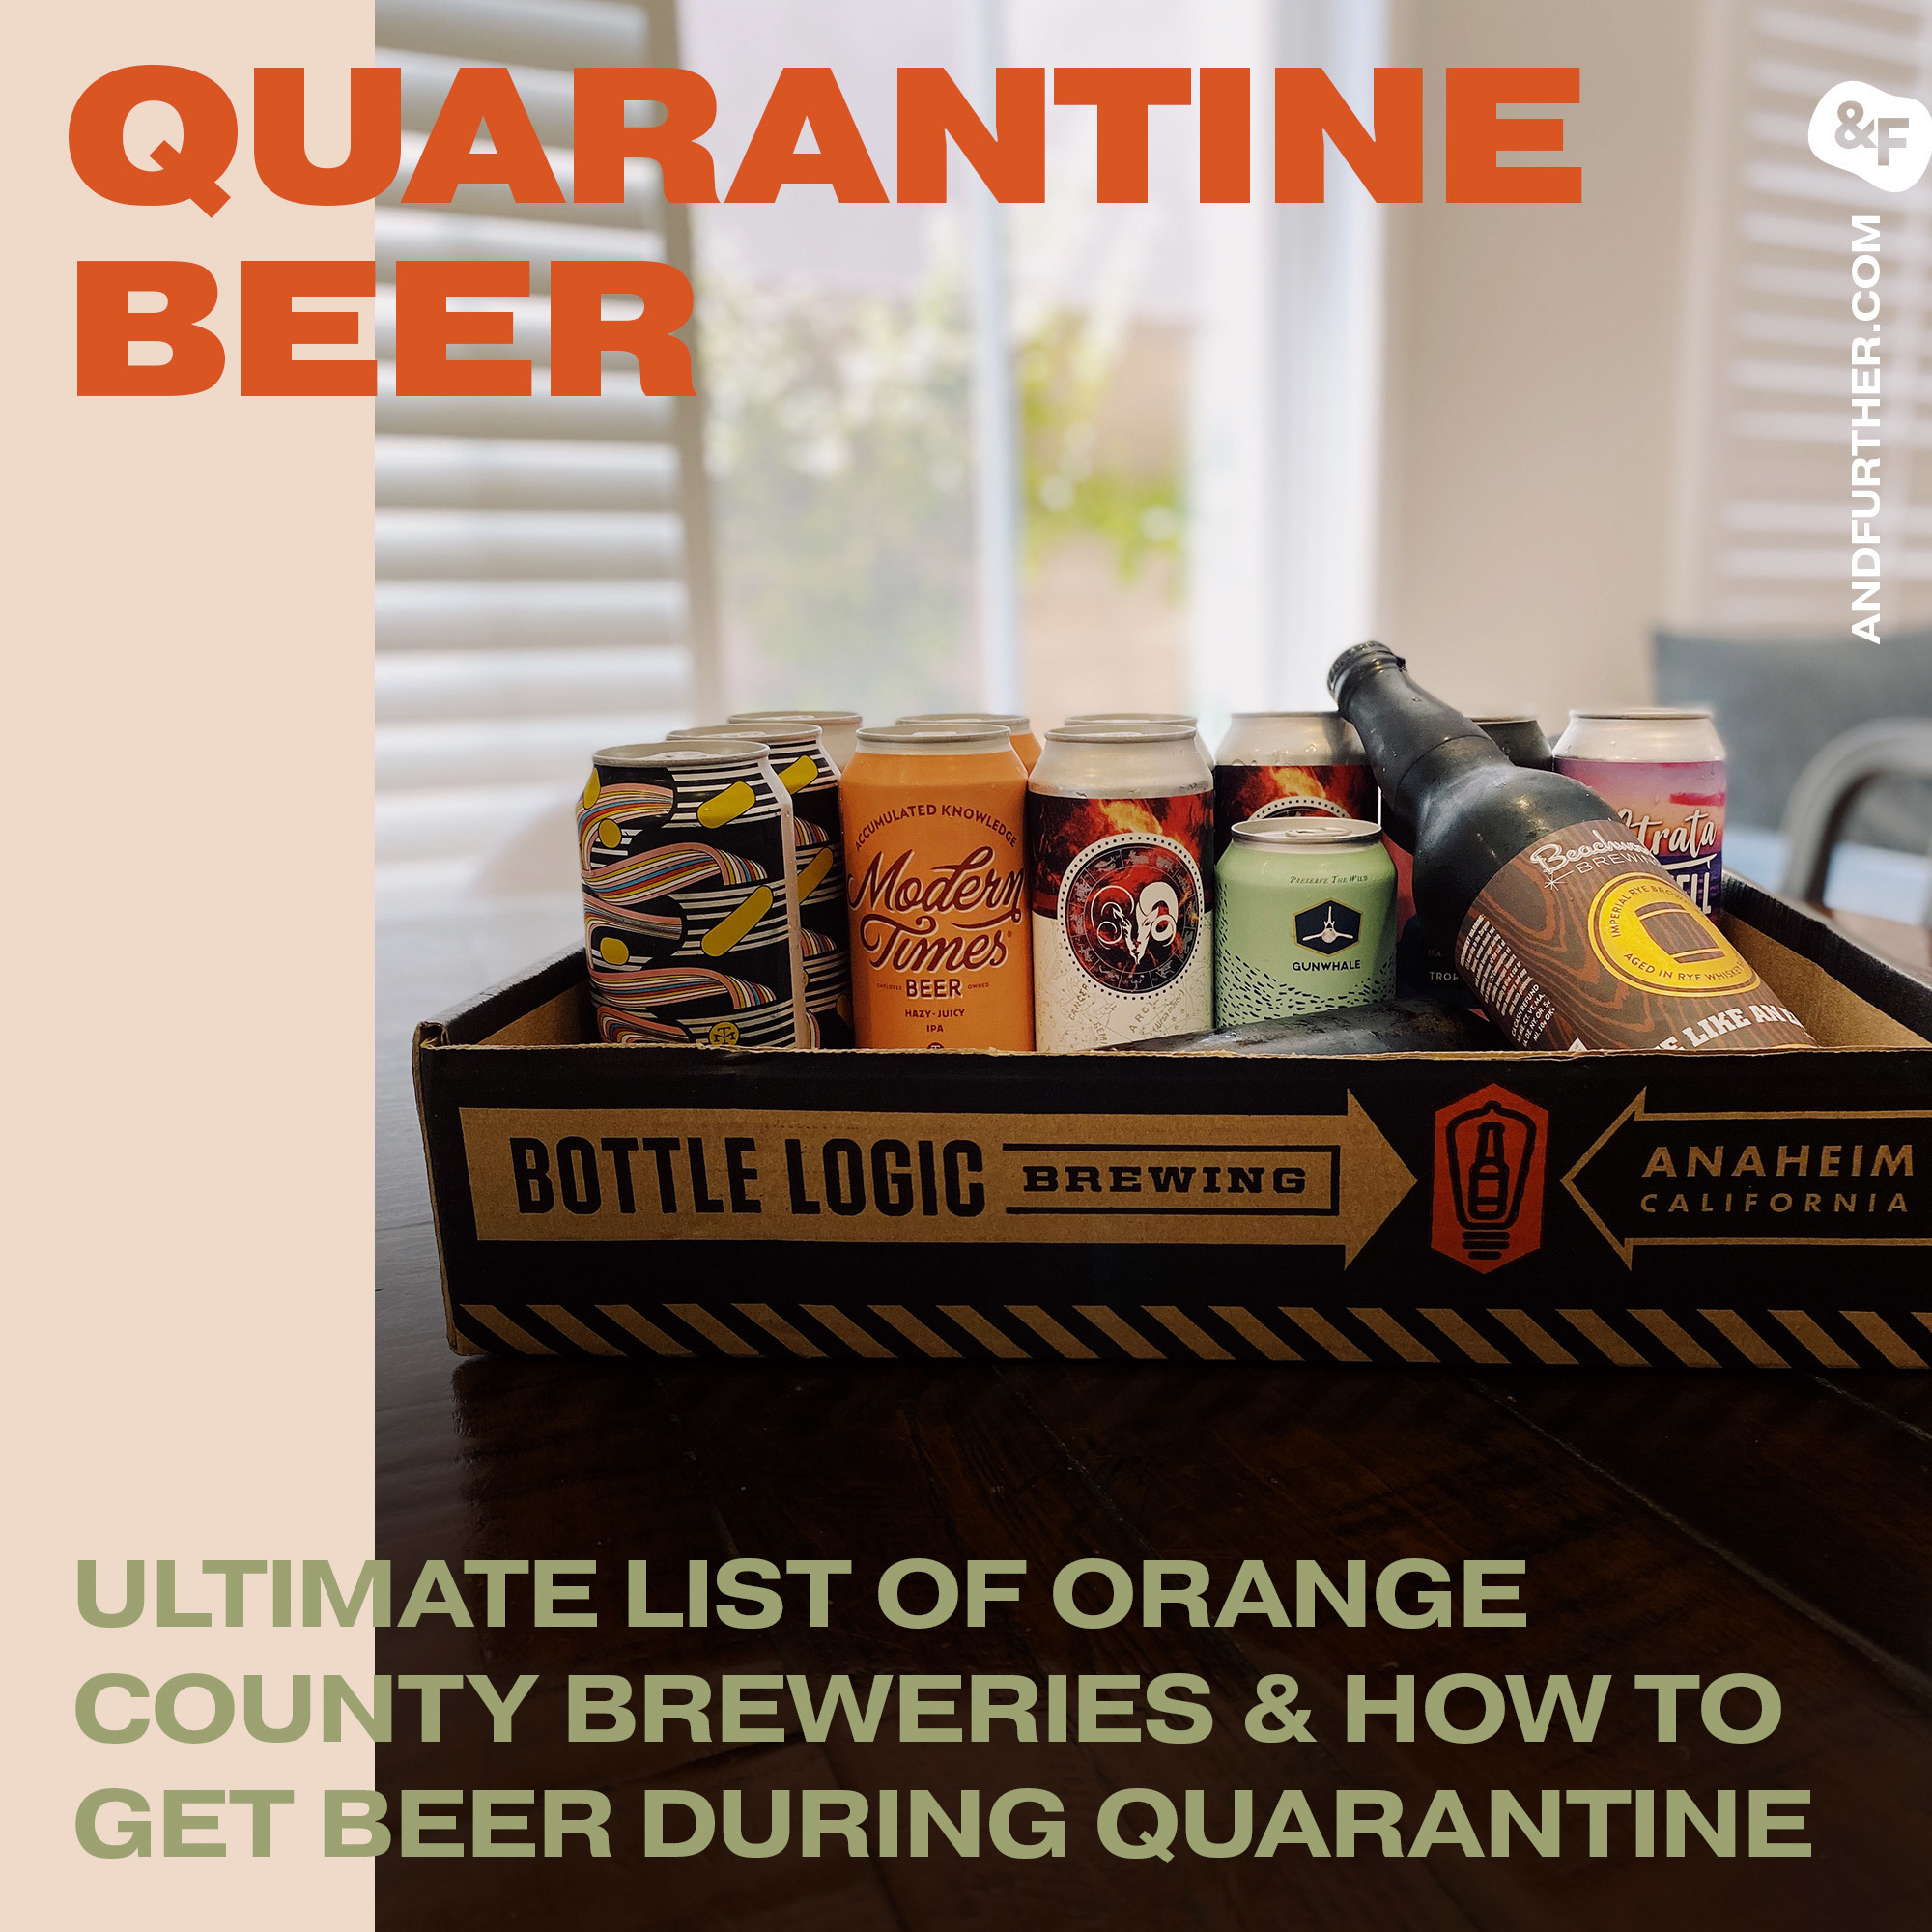 Quarantine Beer - an ultimate guide by And Further